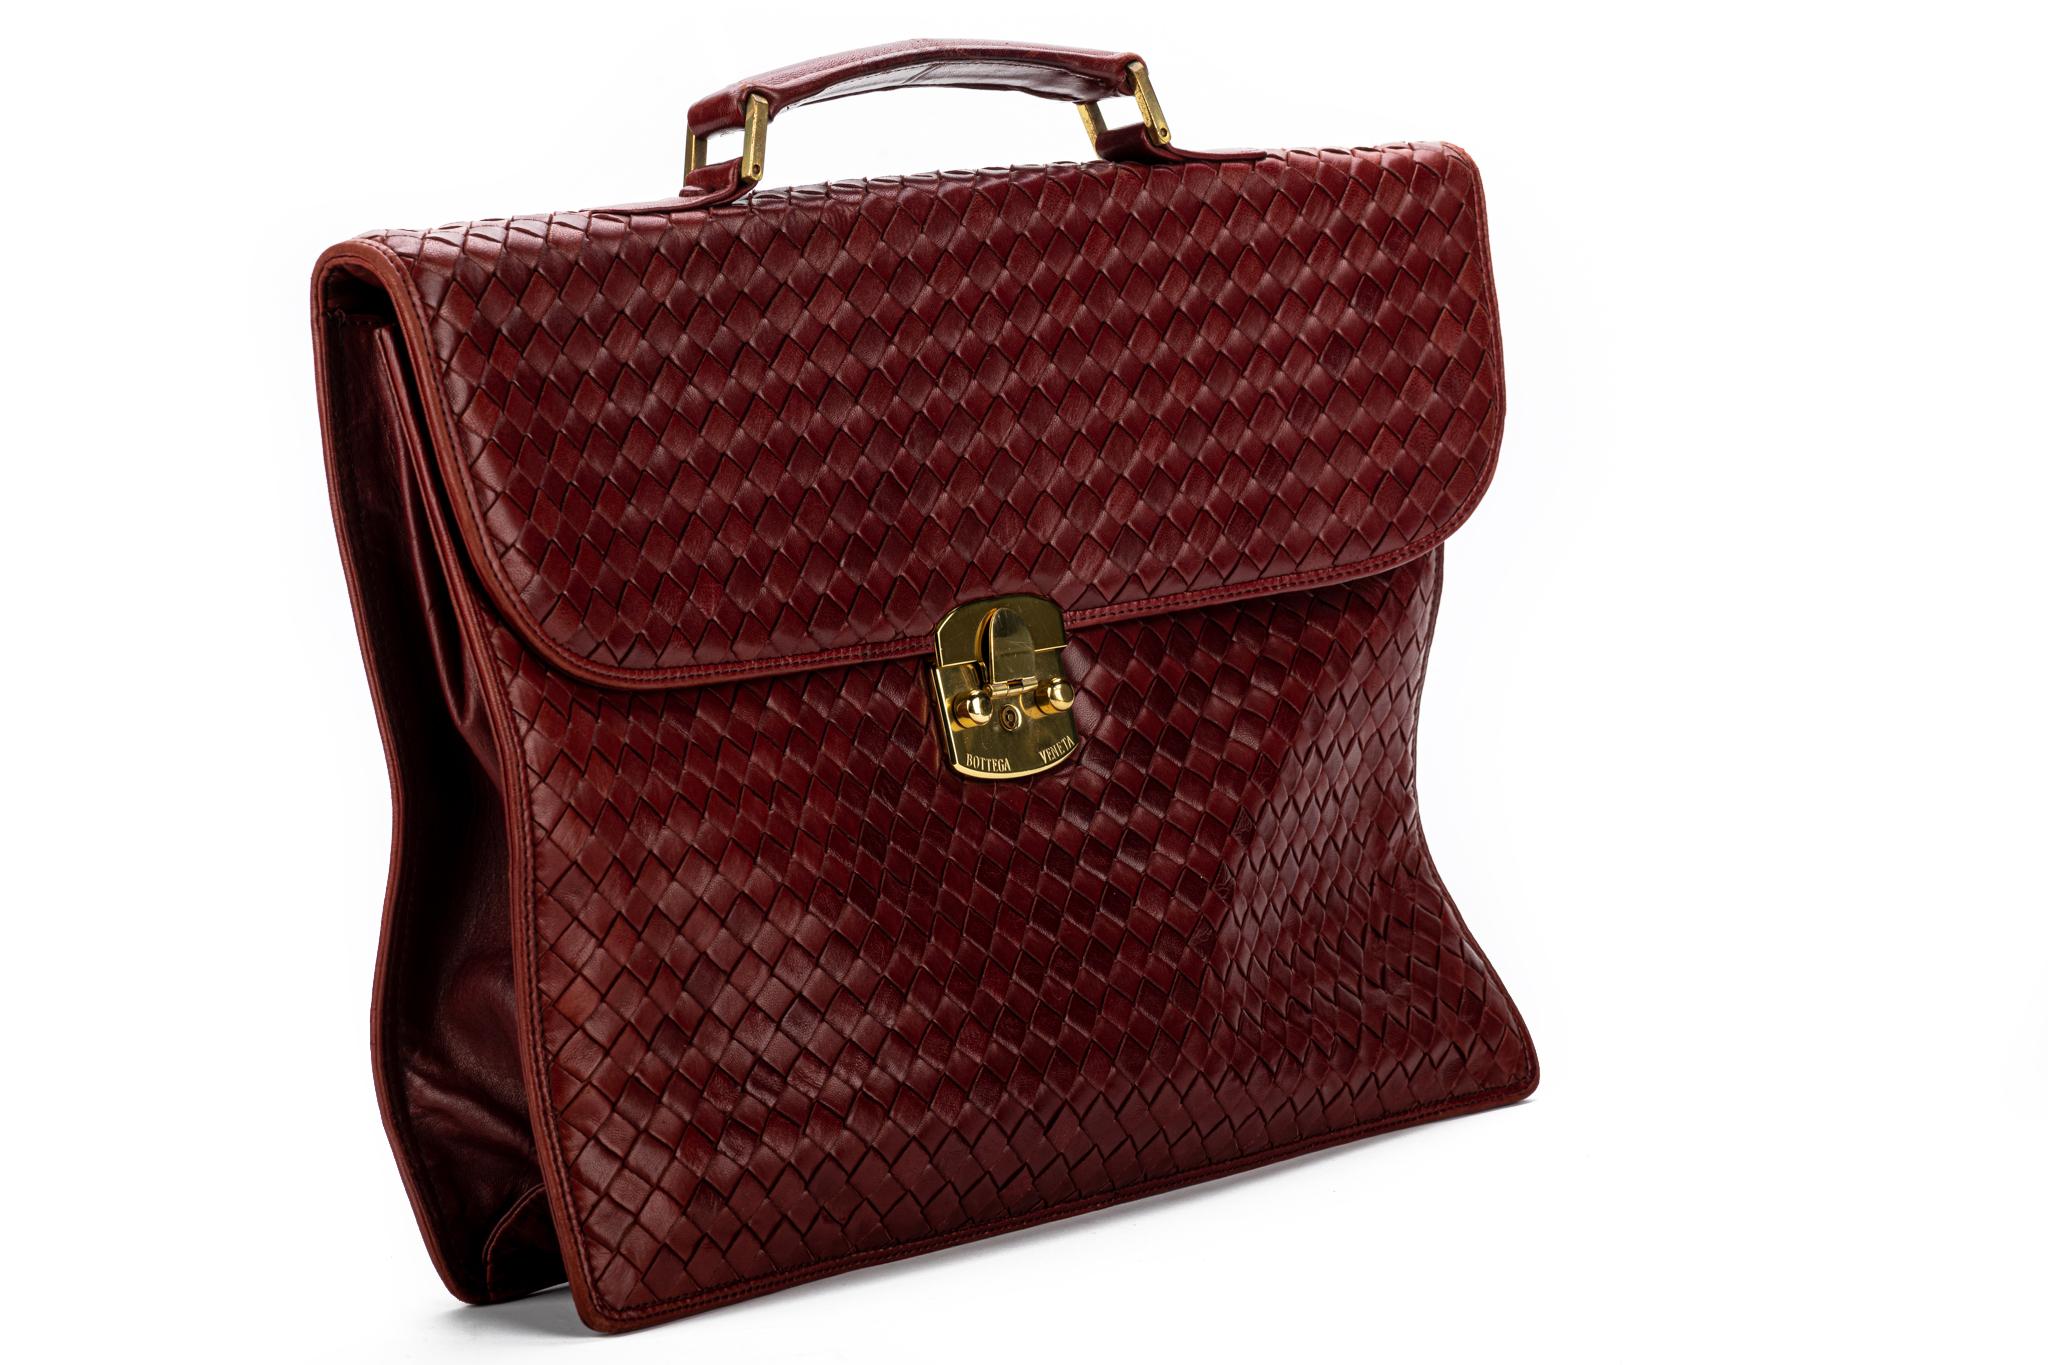 Buttery soft Vintage Bottega Veneta Intrecciato Burgundy Leather Briefcase. Condition is Pre-owned. Zipper works perfectly Brass hardware shows a little wear. Minor stains inside . Comes with original dust cover.